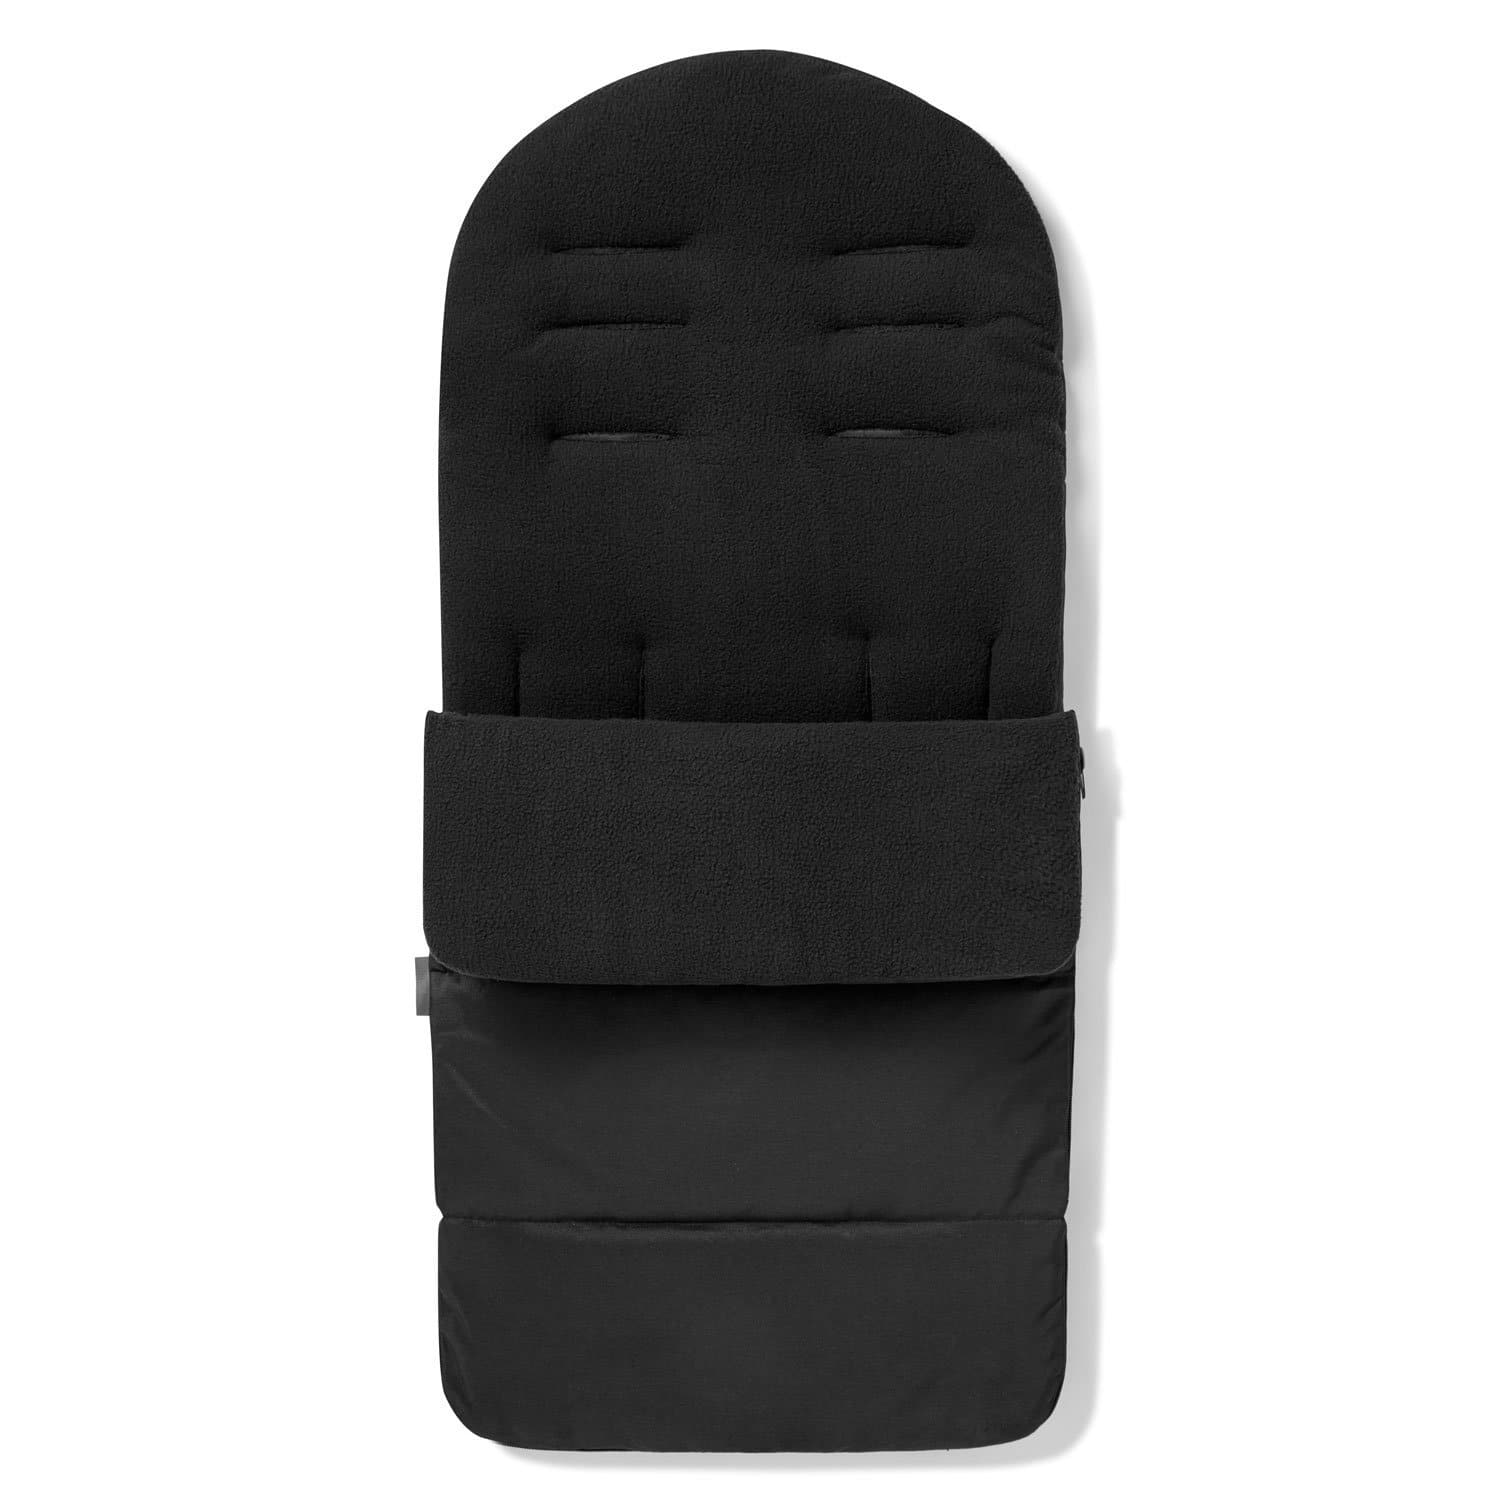 Premium Footmuff / Cosy Toes Compatible with BOB - Black Jack / Fits All Models | For Your Little One